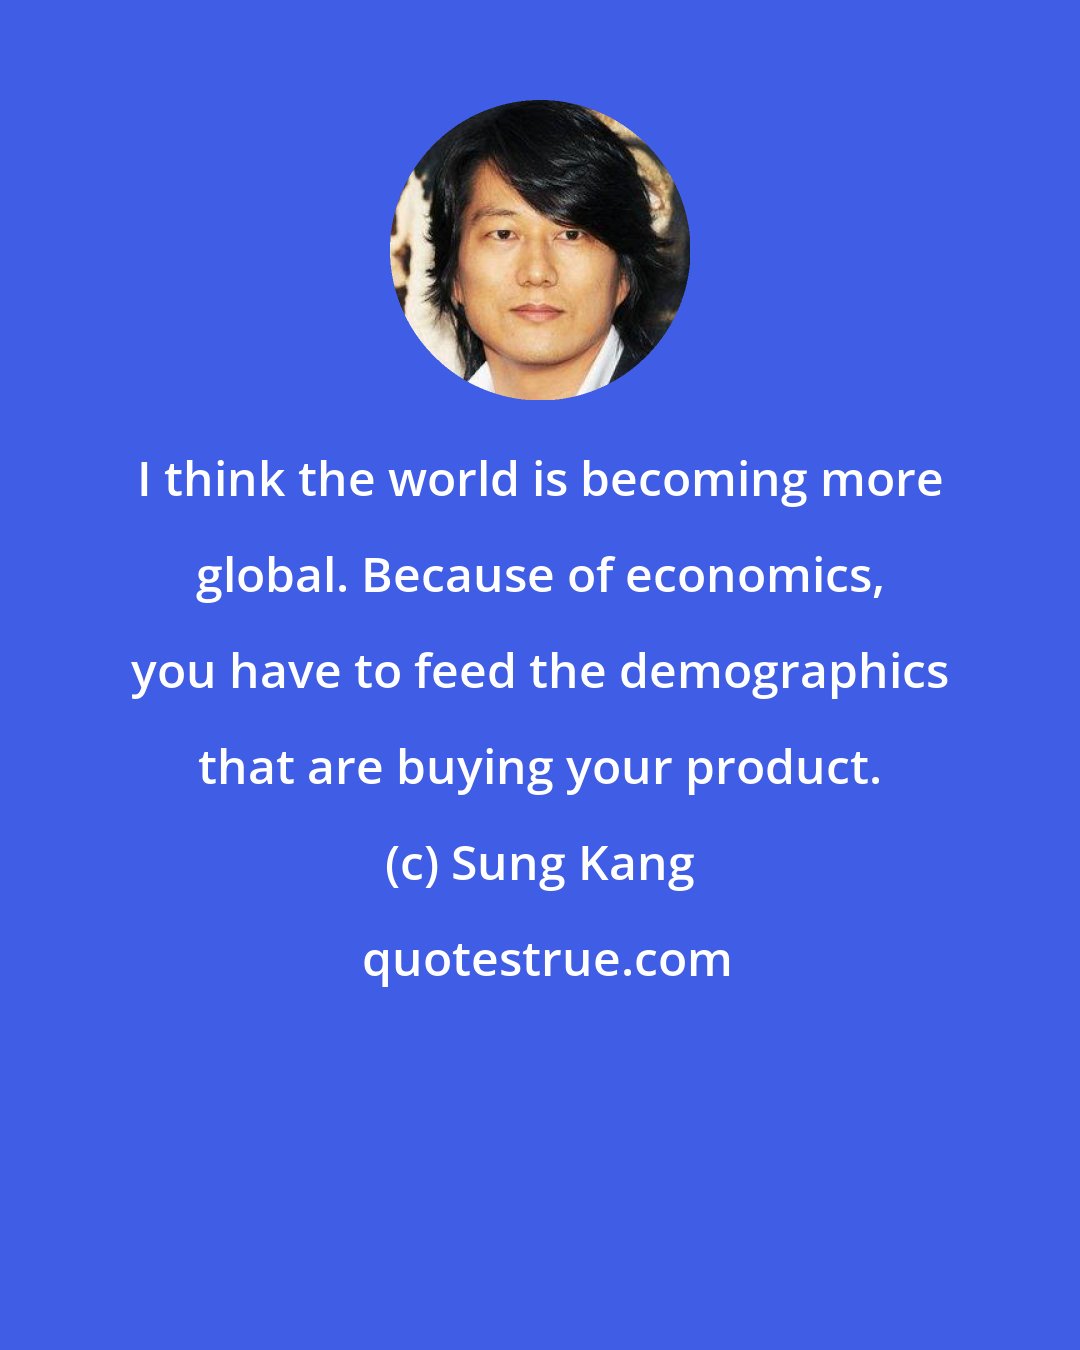 Sung Kang: I think the world is becoming more global. Because of economics, you have to feed the demographics that are buying your product.